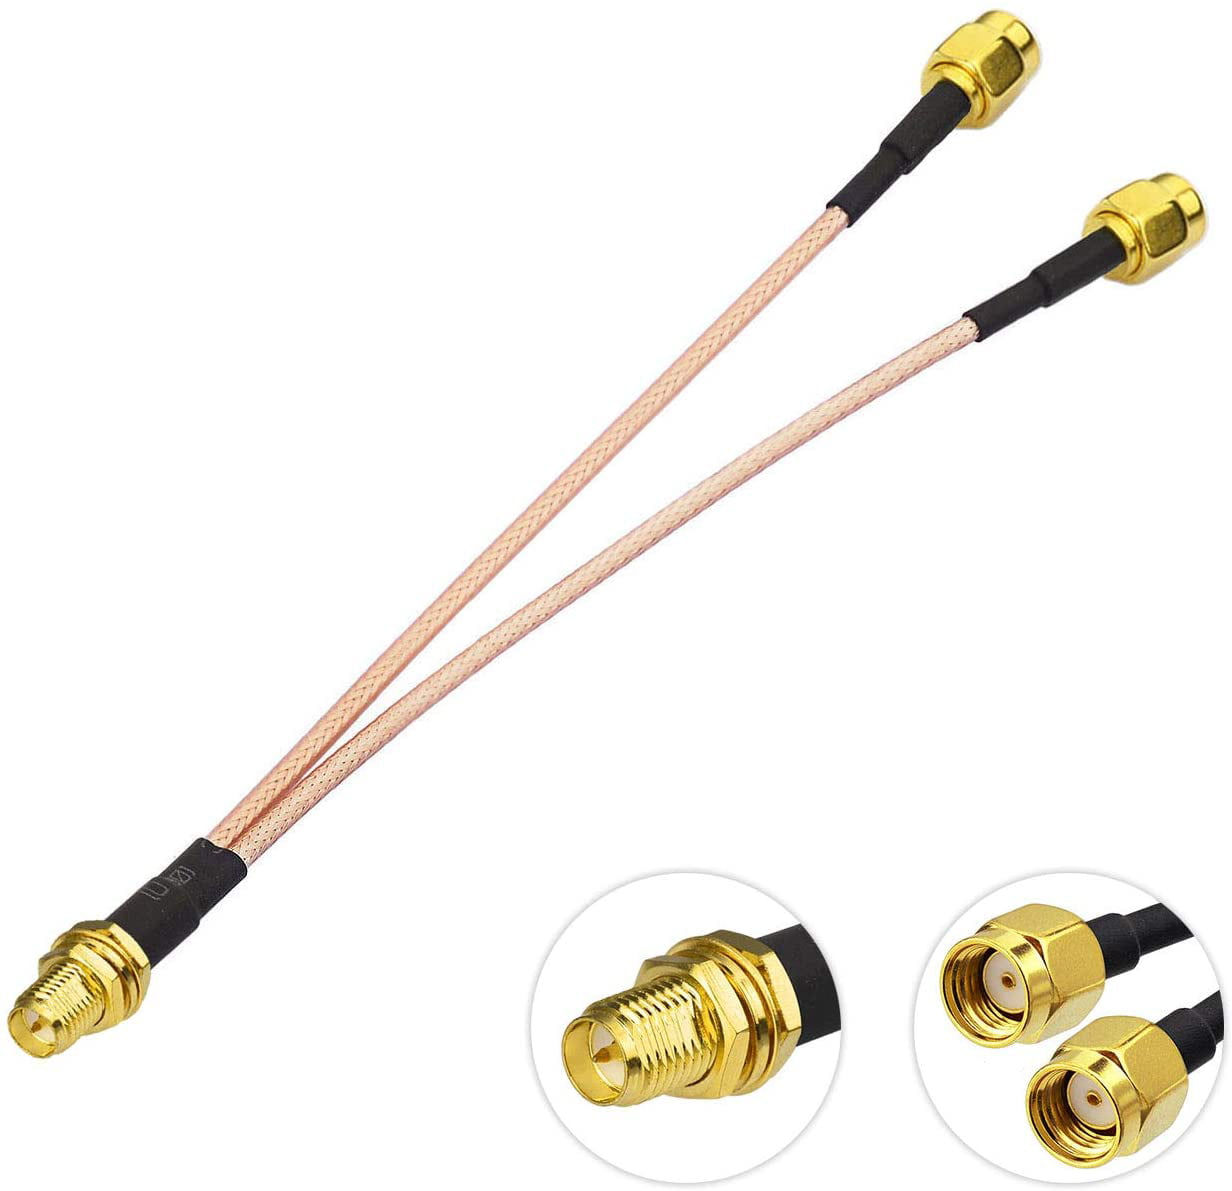 0.5ft Rf Wire Connector SMA Male Straight to Ts9 Plug Right Angle Assembly Extension Coaxial Cable RG316 15cm for Wireless Antenna Ships from USA 